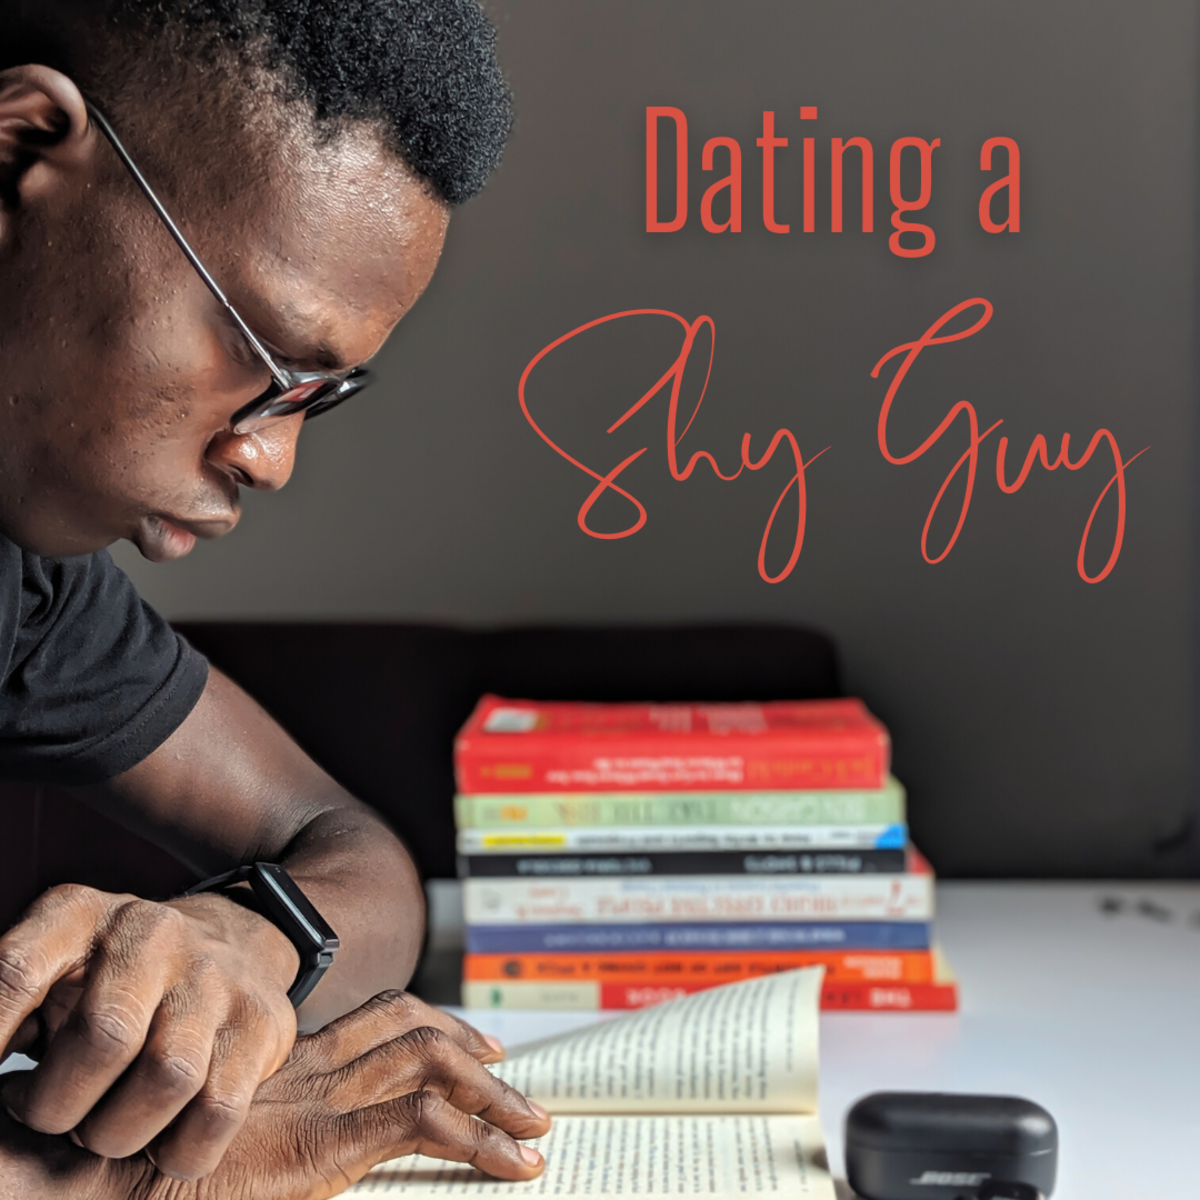 12 Tips for Dating a Shy Guy